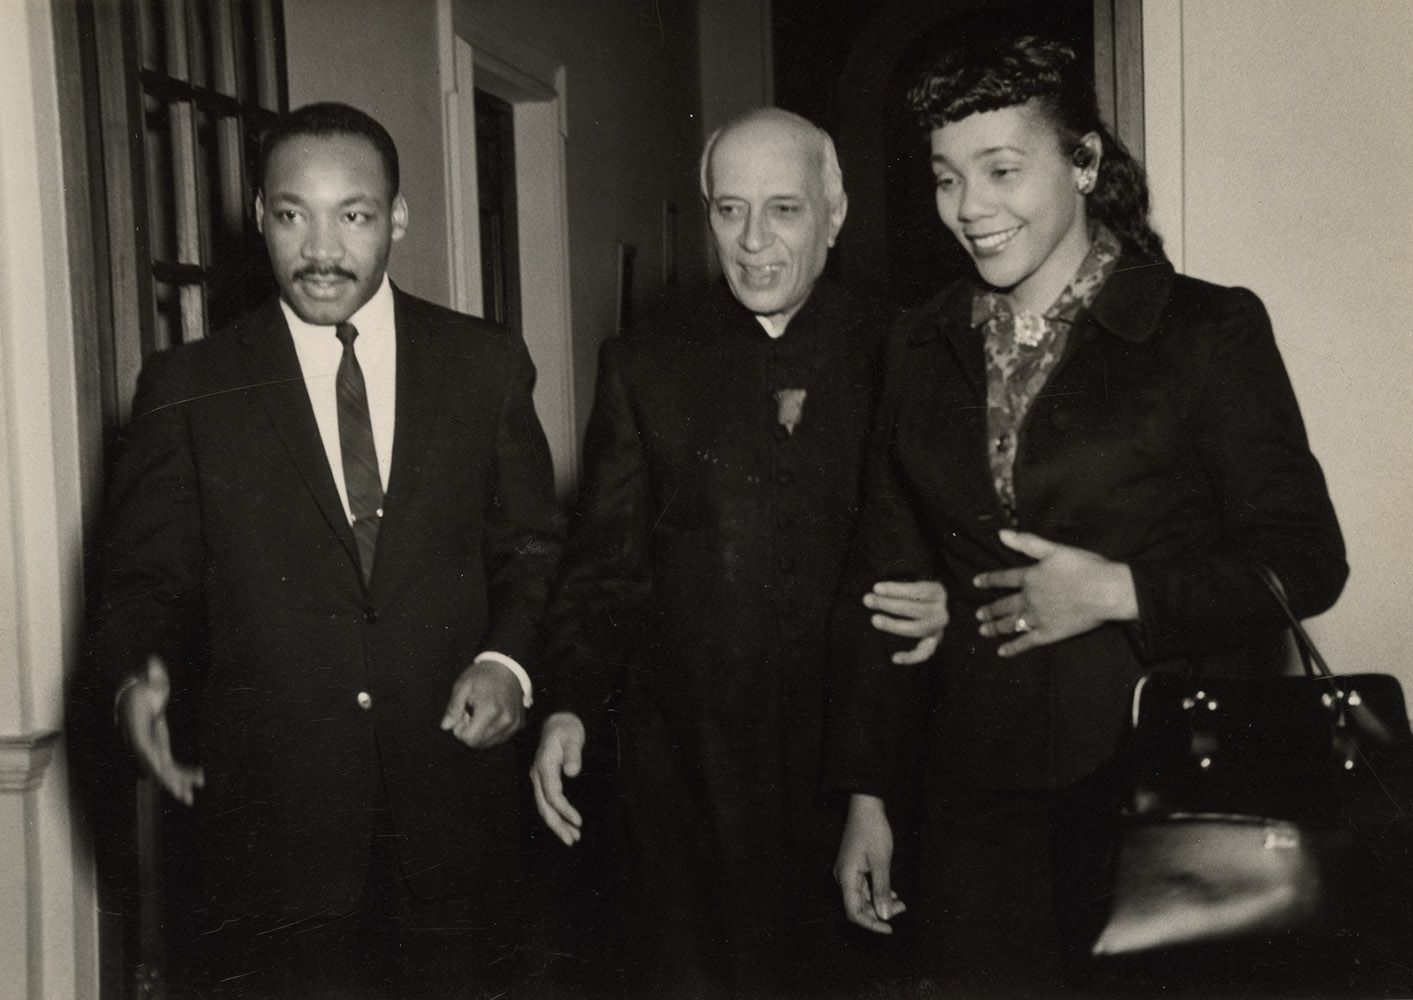 Dr. Martin Luther King Jr. and his wife, Coretta Scott King, with Prime Minister Nehru during their visit to India, 1959